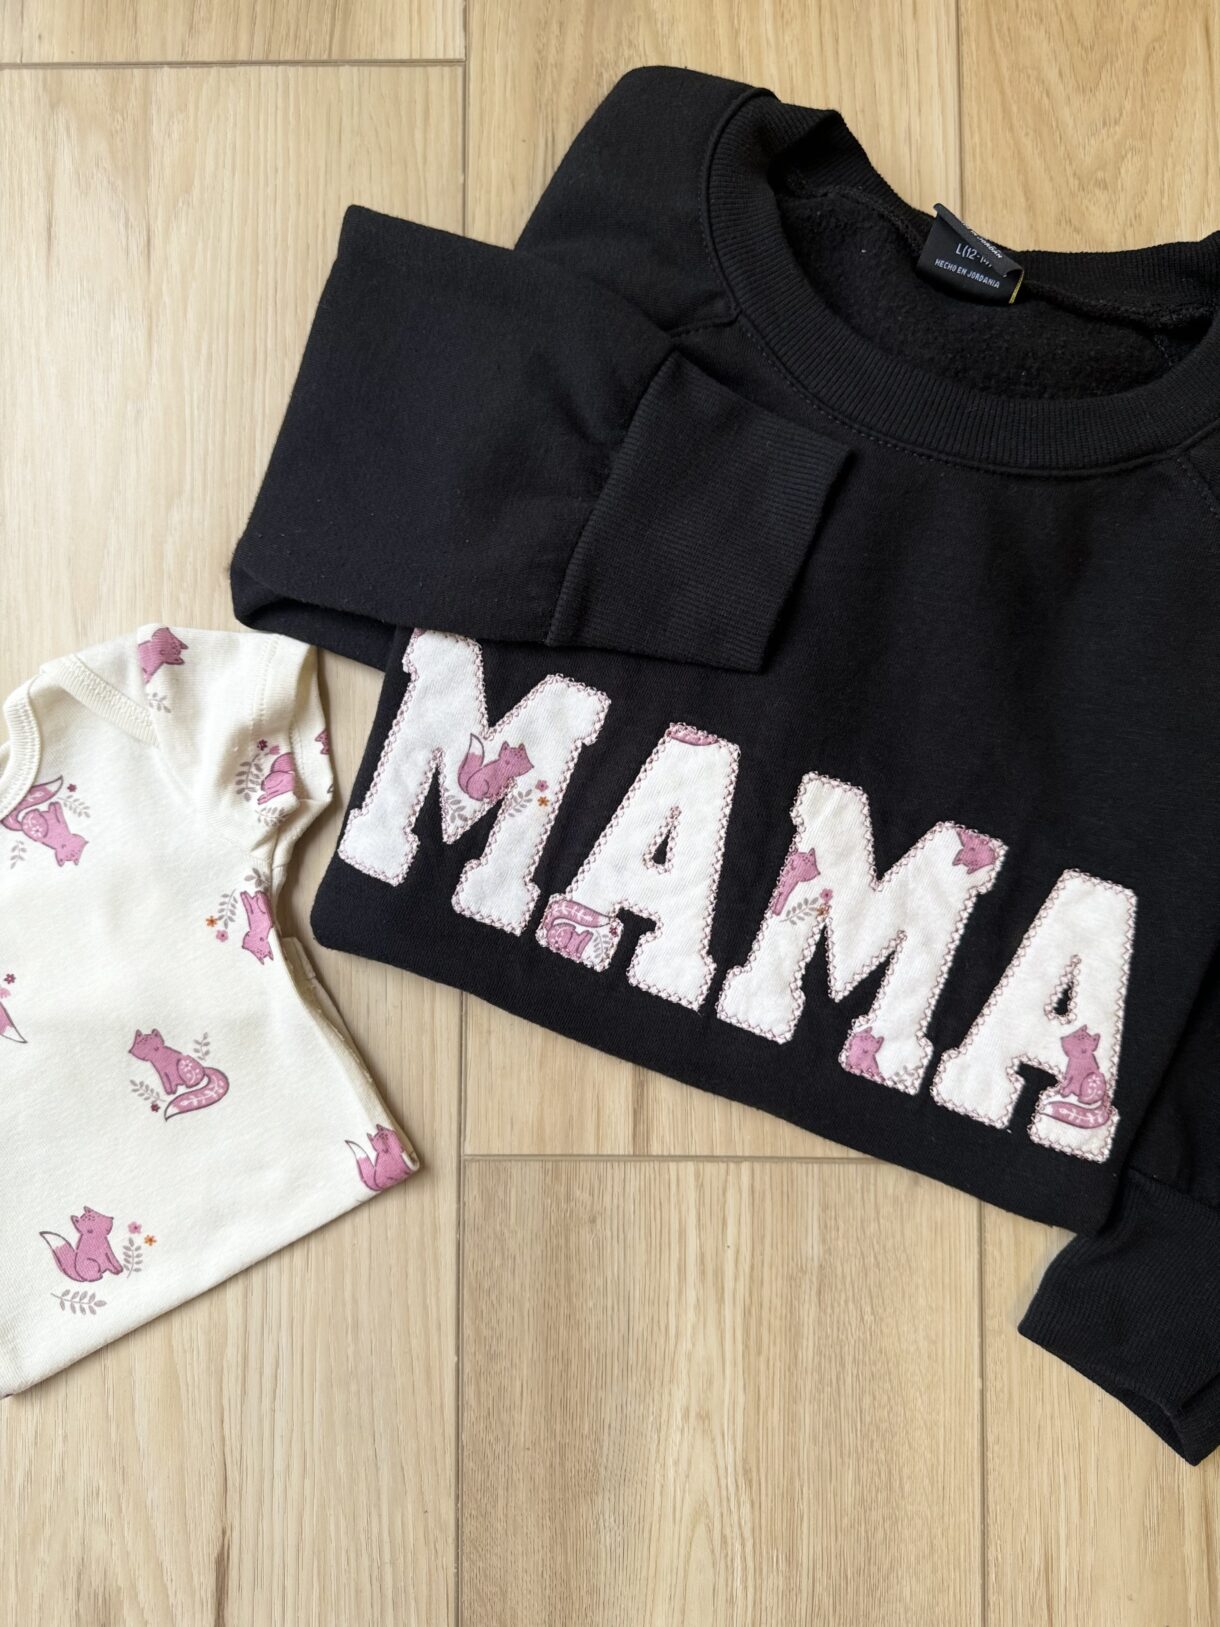 Sweatshirt with embroidered applique lettering